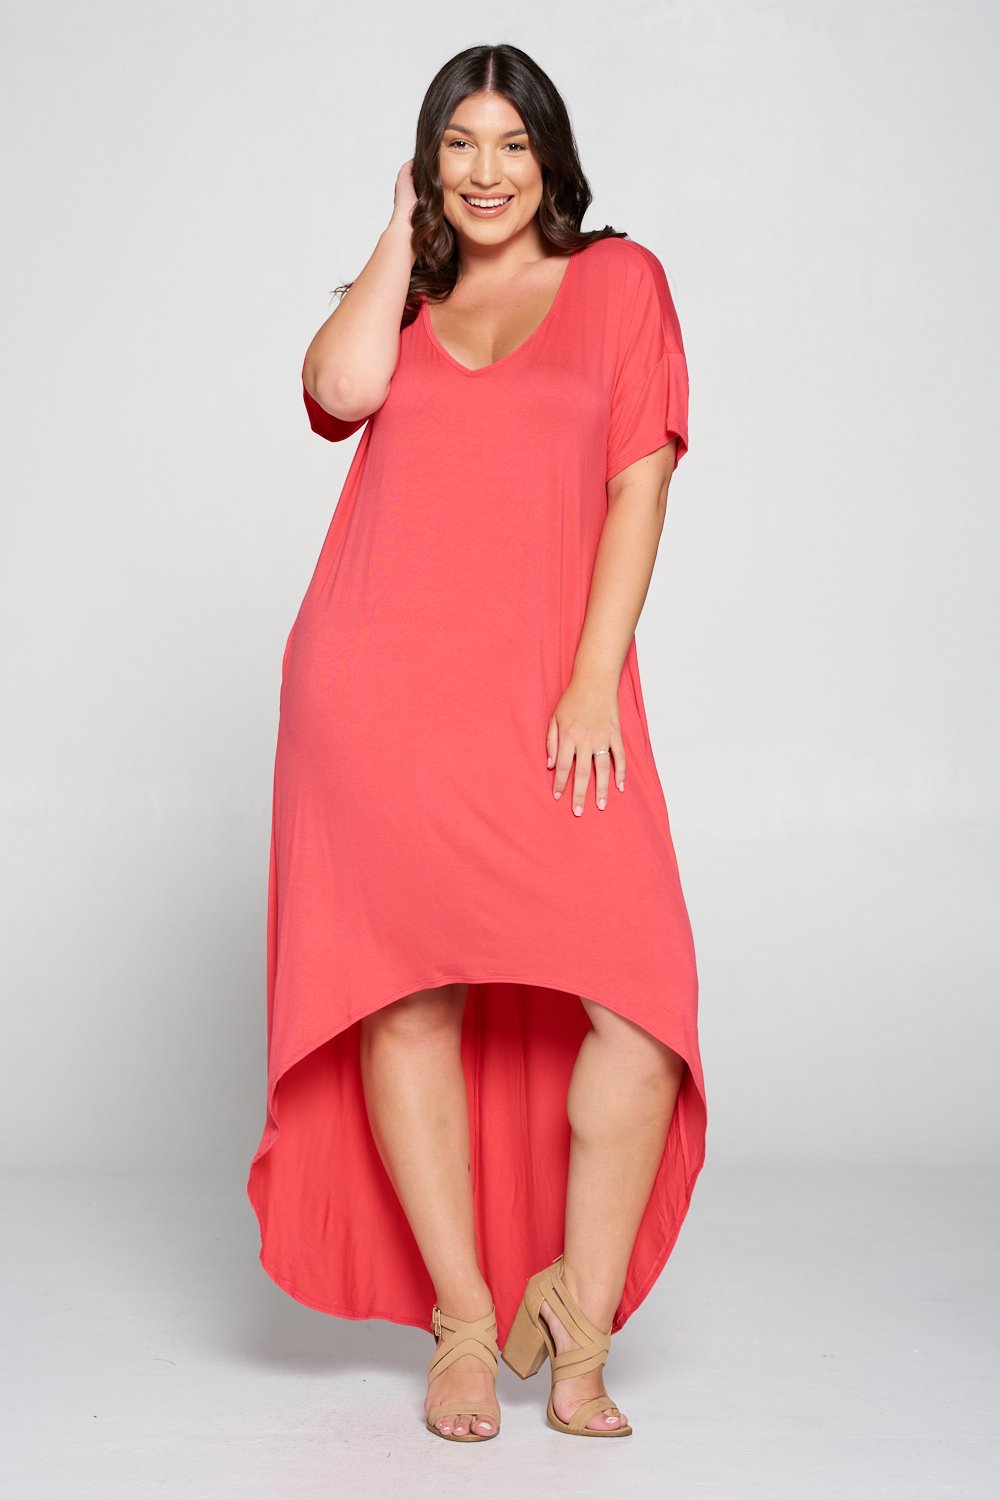 livd L I V D women's contemporary plus size clothing high low hi lo dress with pockets v neck sleeves in coral pink